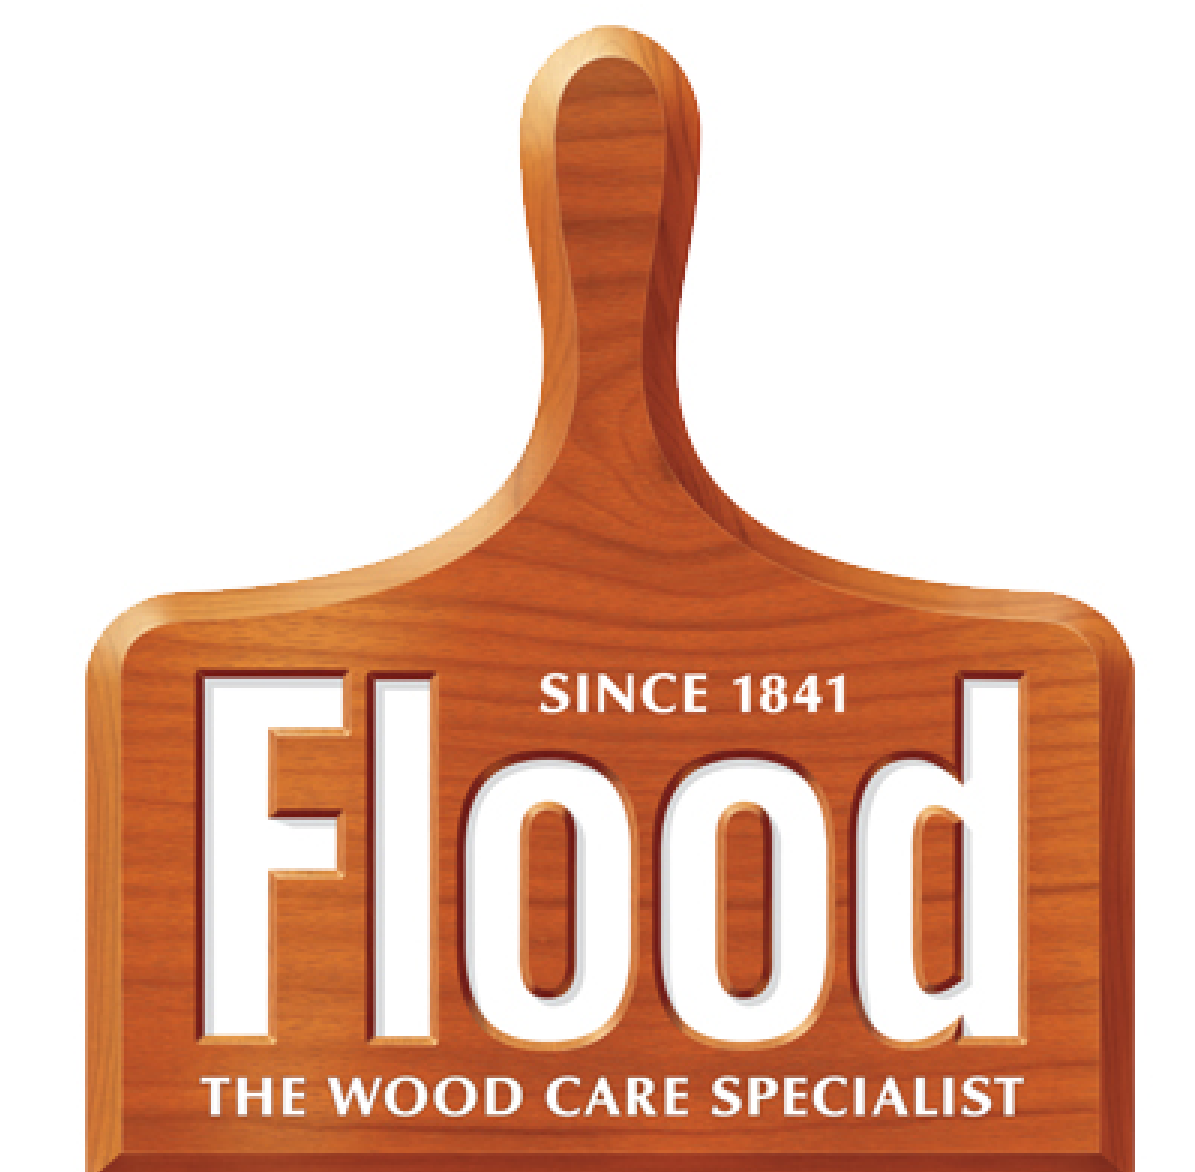 Flood Floetrol Acrylic Paint Additive and Stain Conditioner 1L - Made in  Australia